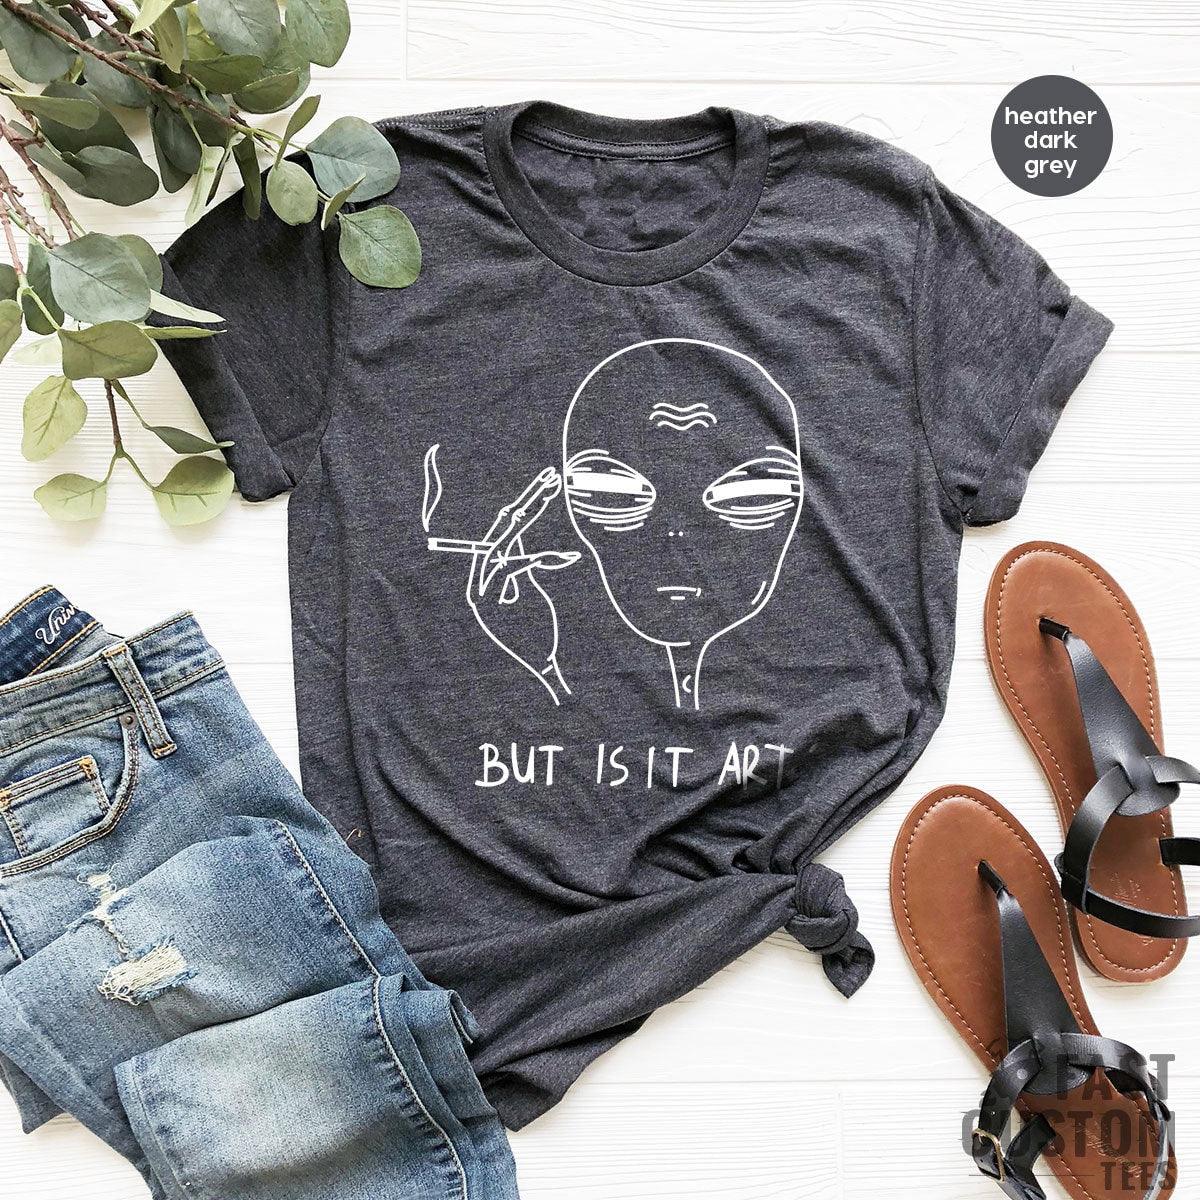 Alien T Shirt, Funny Ufo Shirt, But Is It Art, Funny Shirt, Smoking Alien Shirt, Space Gifts, Funny Saying Shirt, Funny Quote Shirt - Fastdeliverytees.com